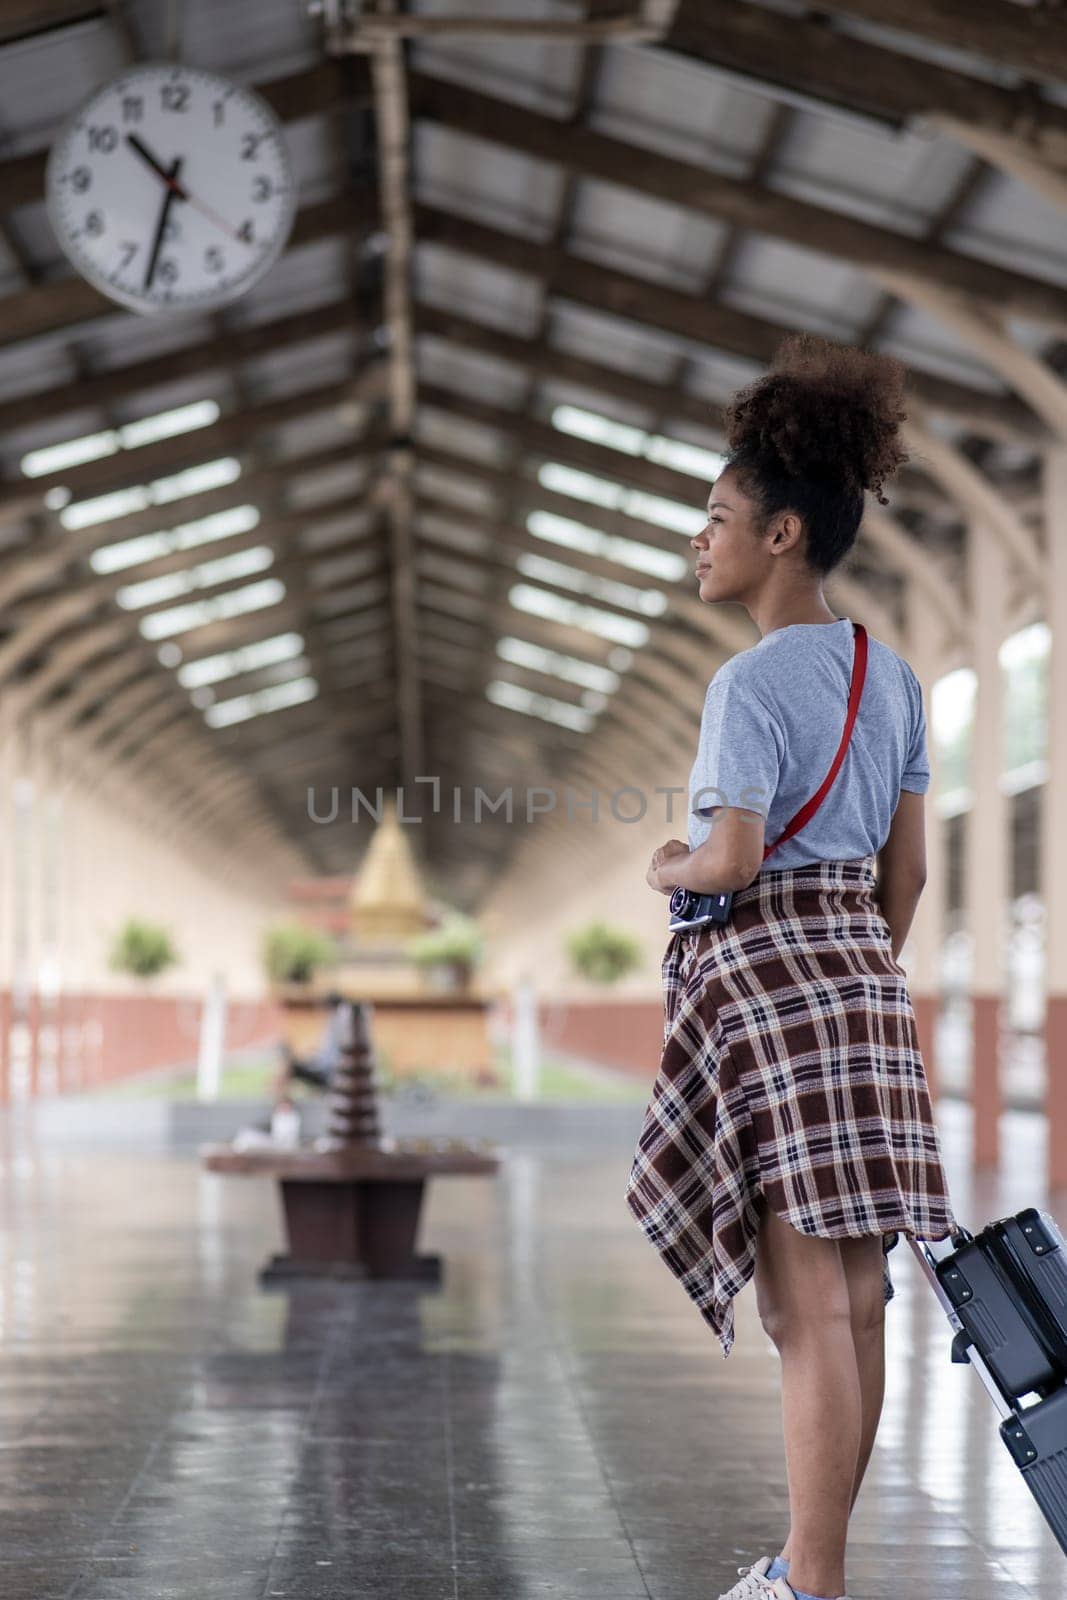 Young female traveler walking standing with a suitcase at train station. woman traveler tourist walking standing smiling with luggage at train station. High quality photo